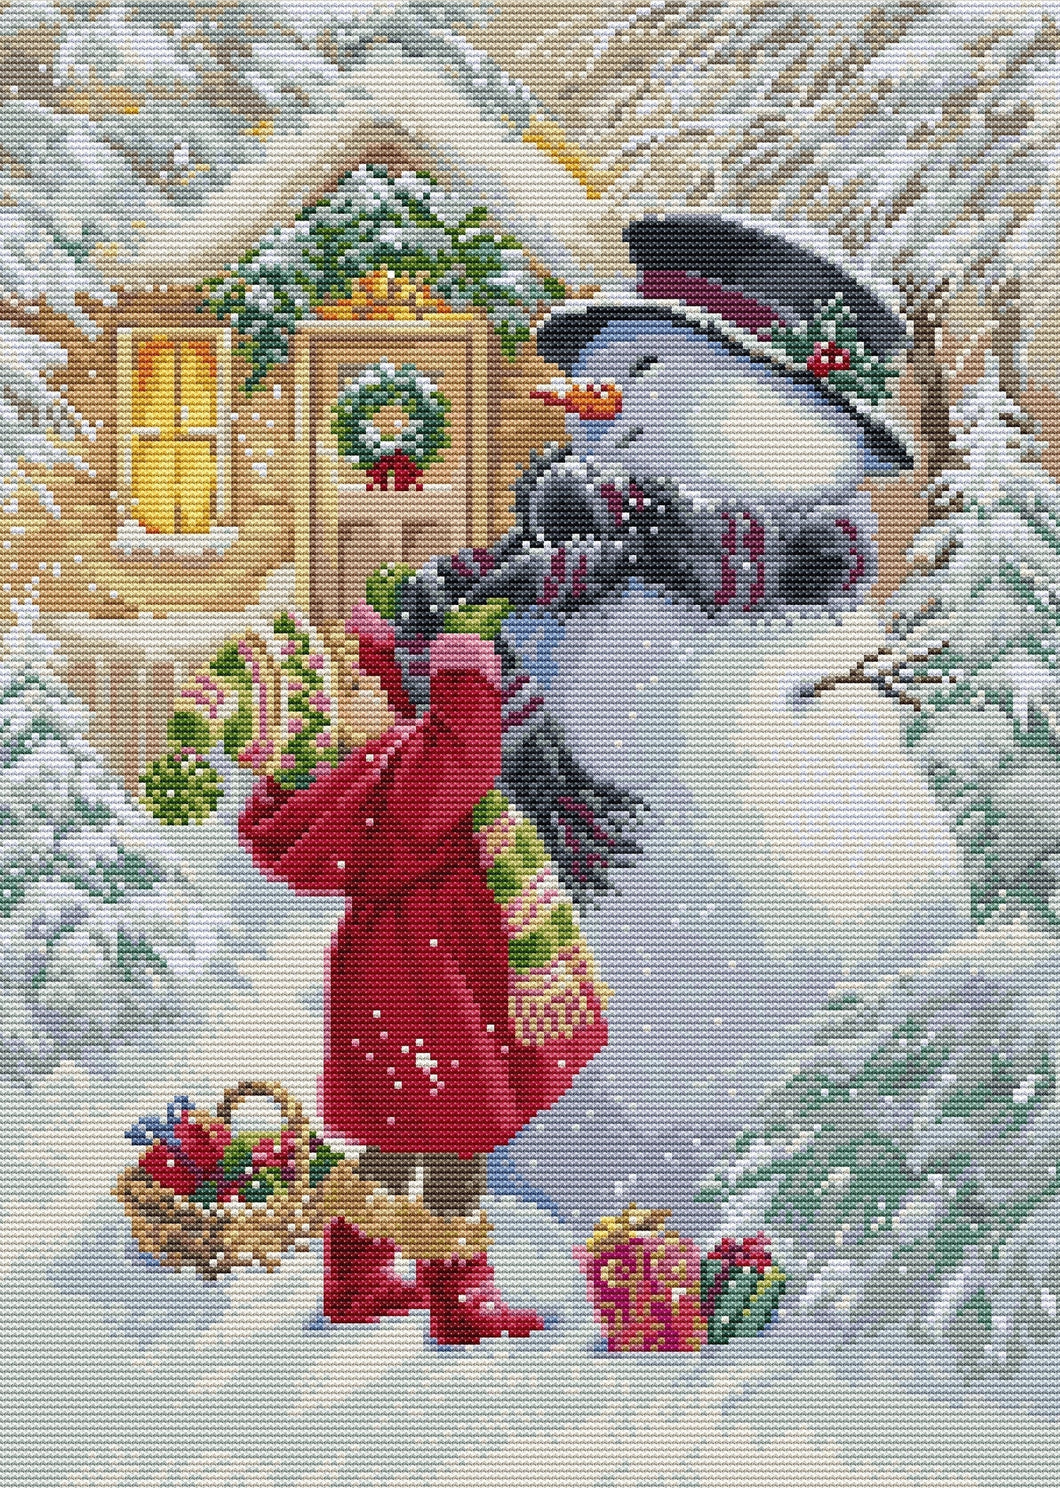 The Girl With The Gifts Cross Stitch Kit